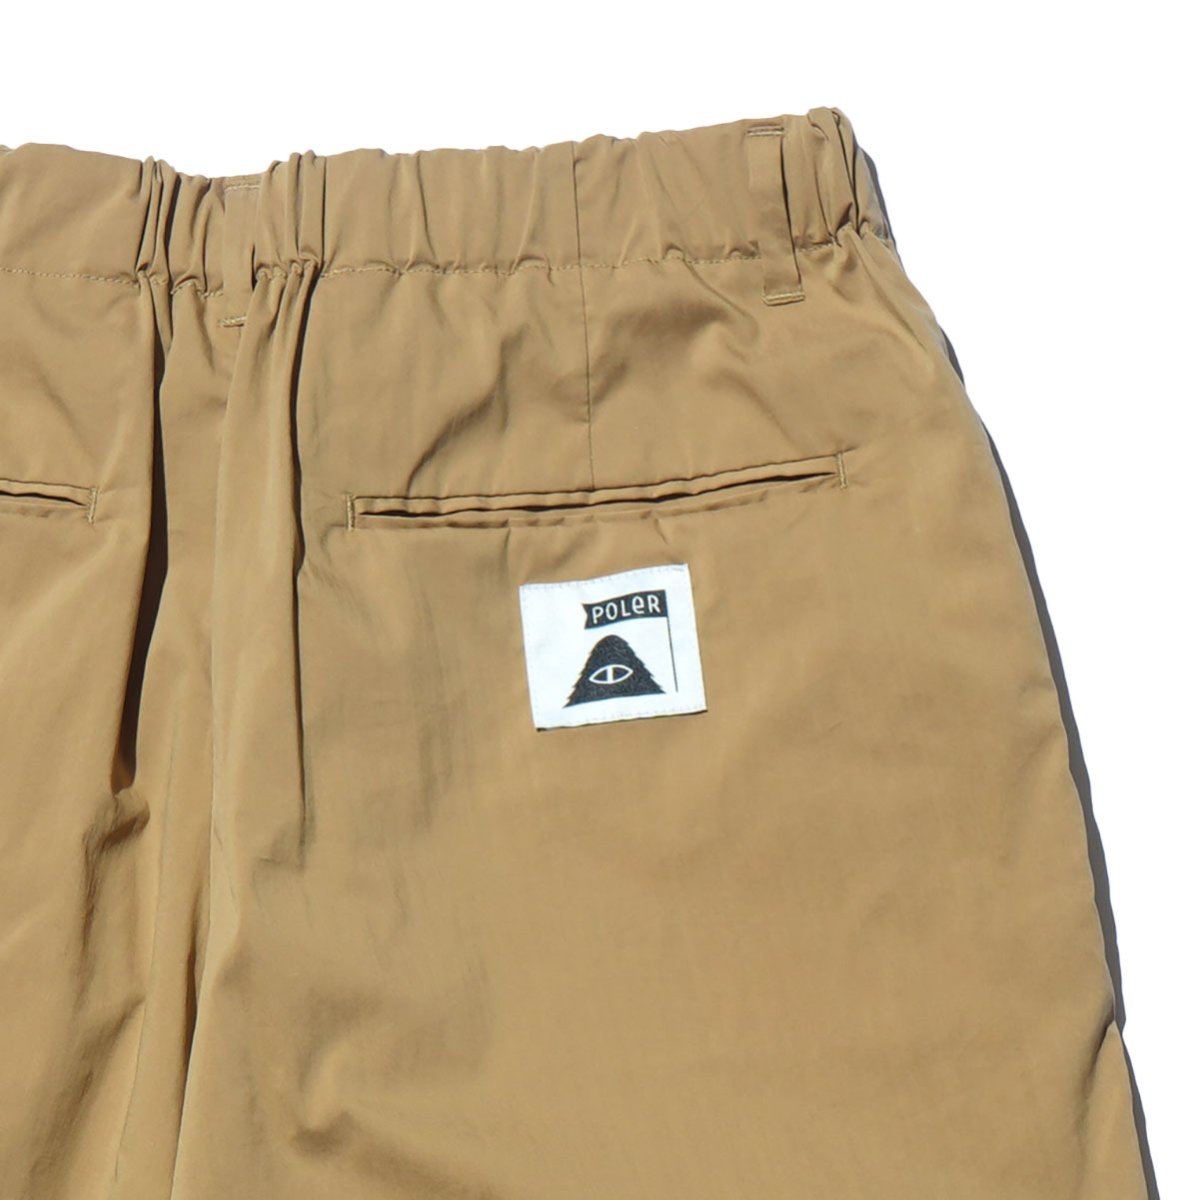 STRETCH ANKLE BALLOON PANTS - OLIVE - POLeR | ポーラー公式通販オンラインストア